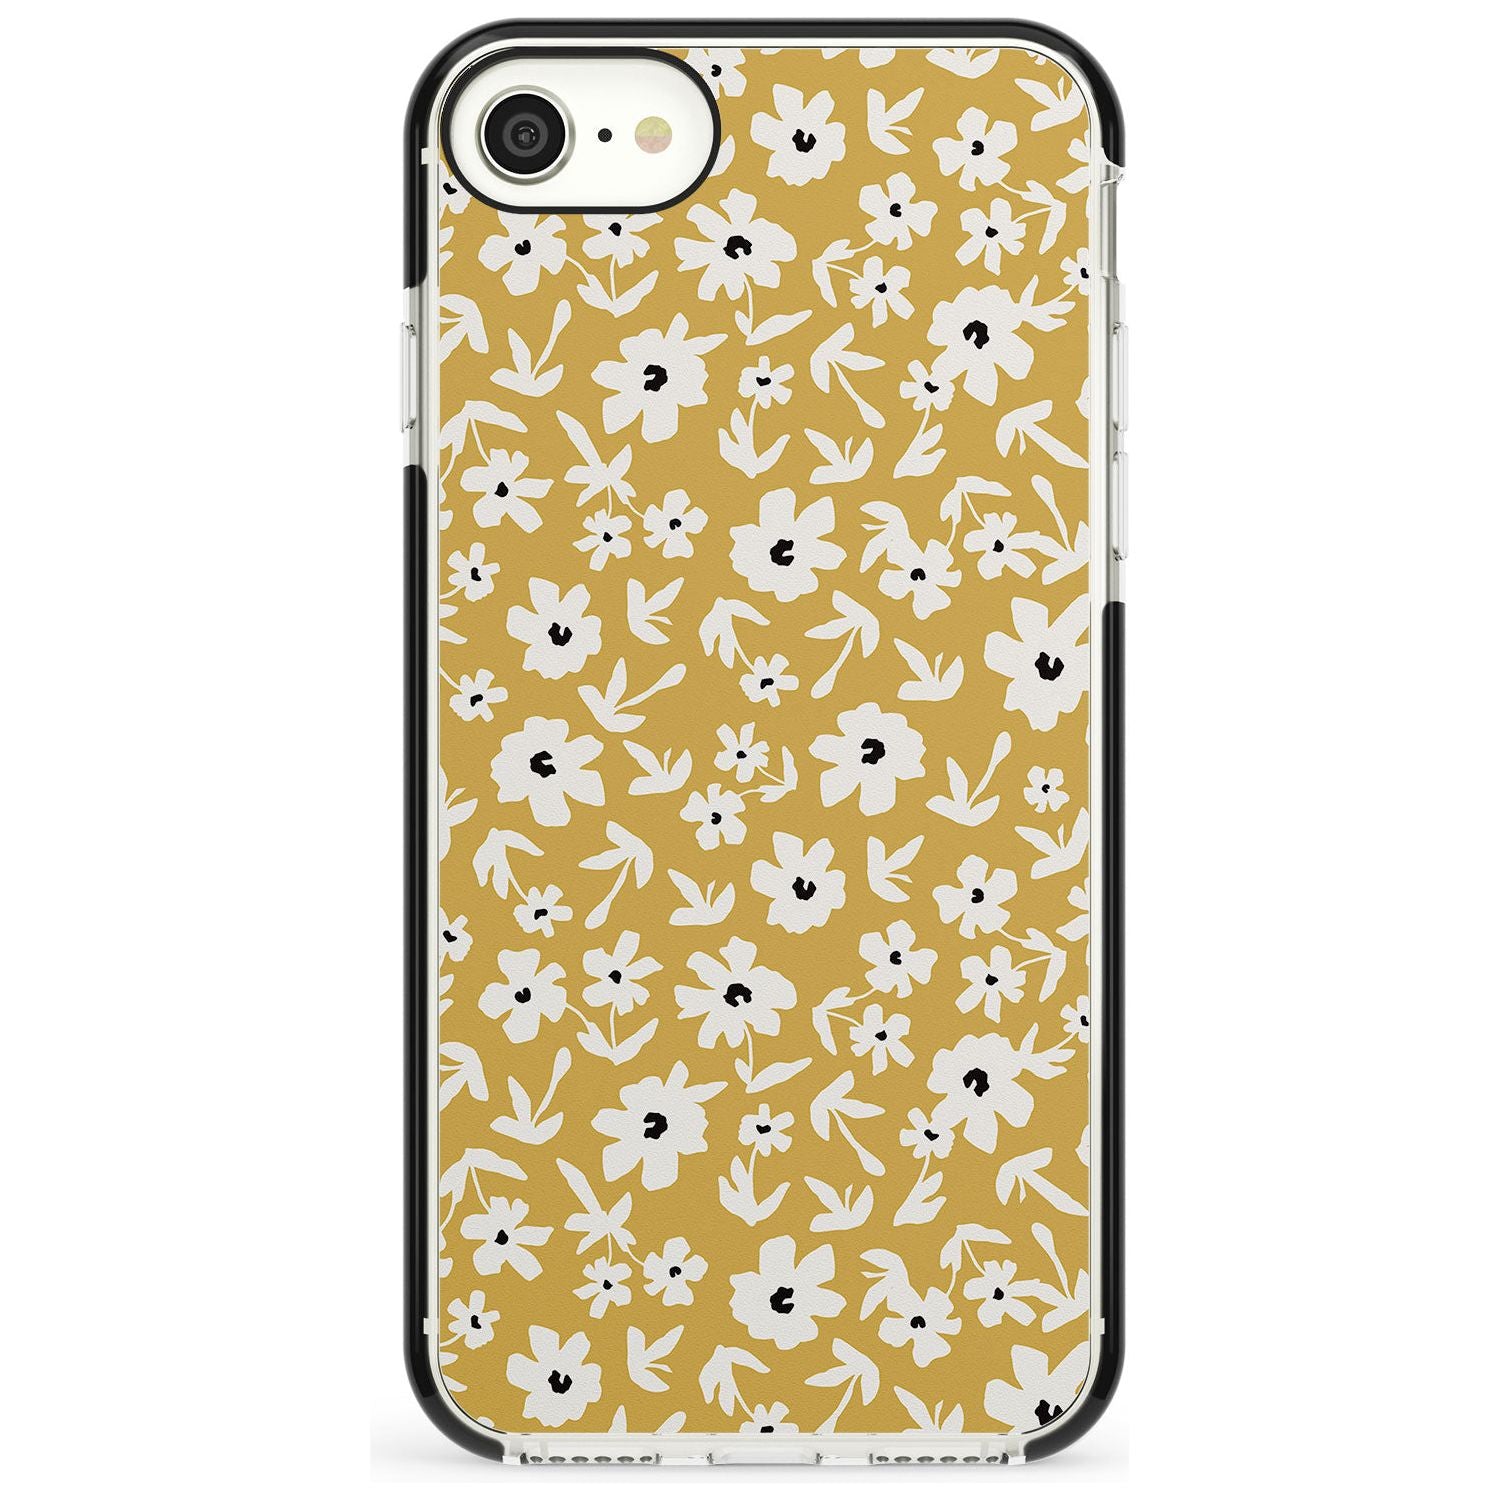 Floral Print on Mustard - Cute Floral Design Pink Fade Impact Phone Case for iPhone SE 8 7 Plus